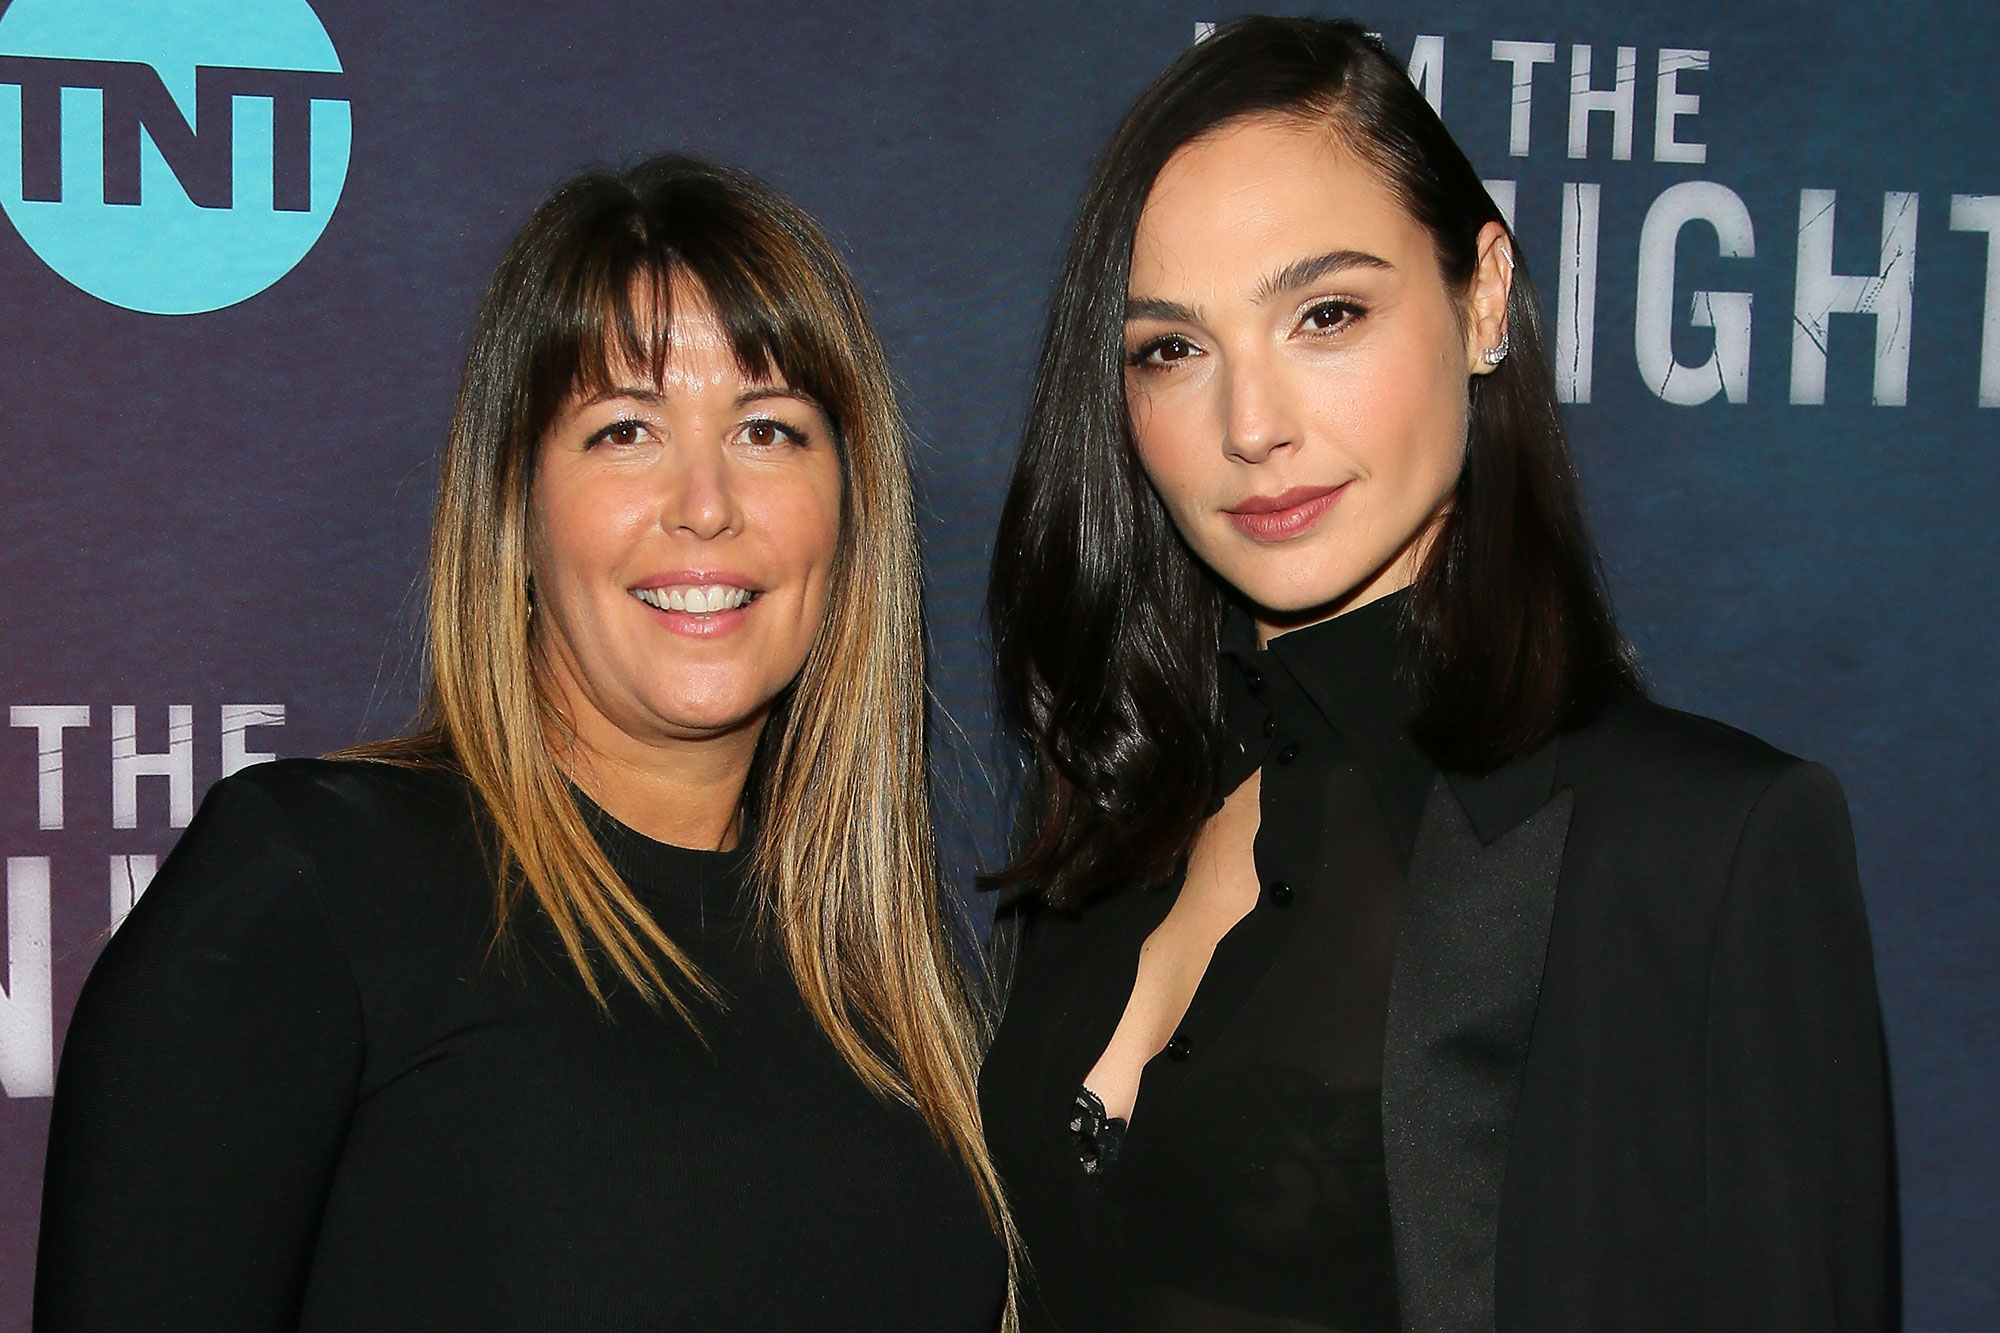 LOS ANGELES, CA - JANUARY 24: Patty Jenkins and Gal Gadot attend the Premiere Of TNT's 'I Am The Night' at Harmony Gold on January 24, 2019 in Los Angeles, California. (Photo by JB Lacroix/WireImage)